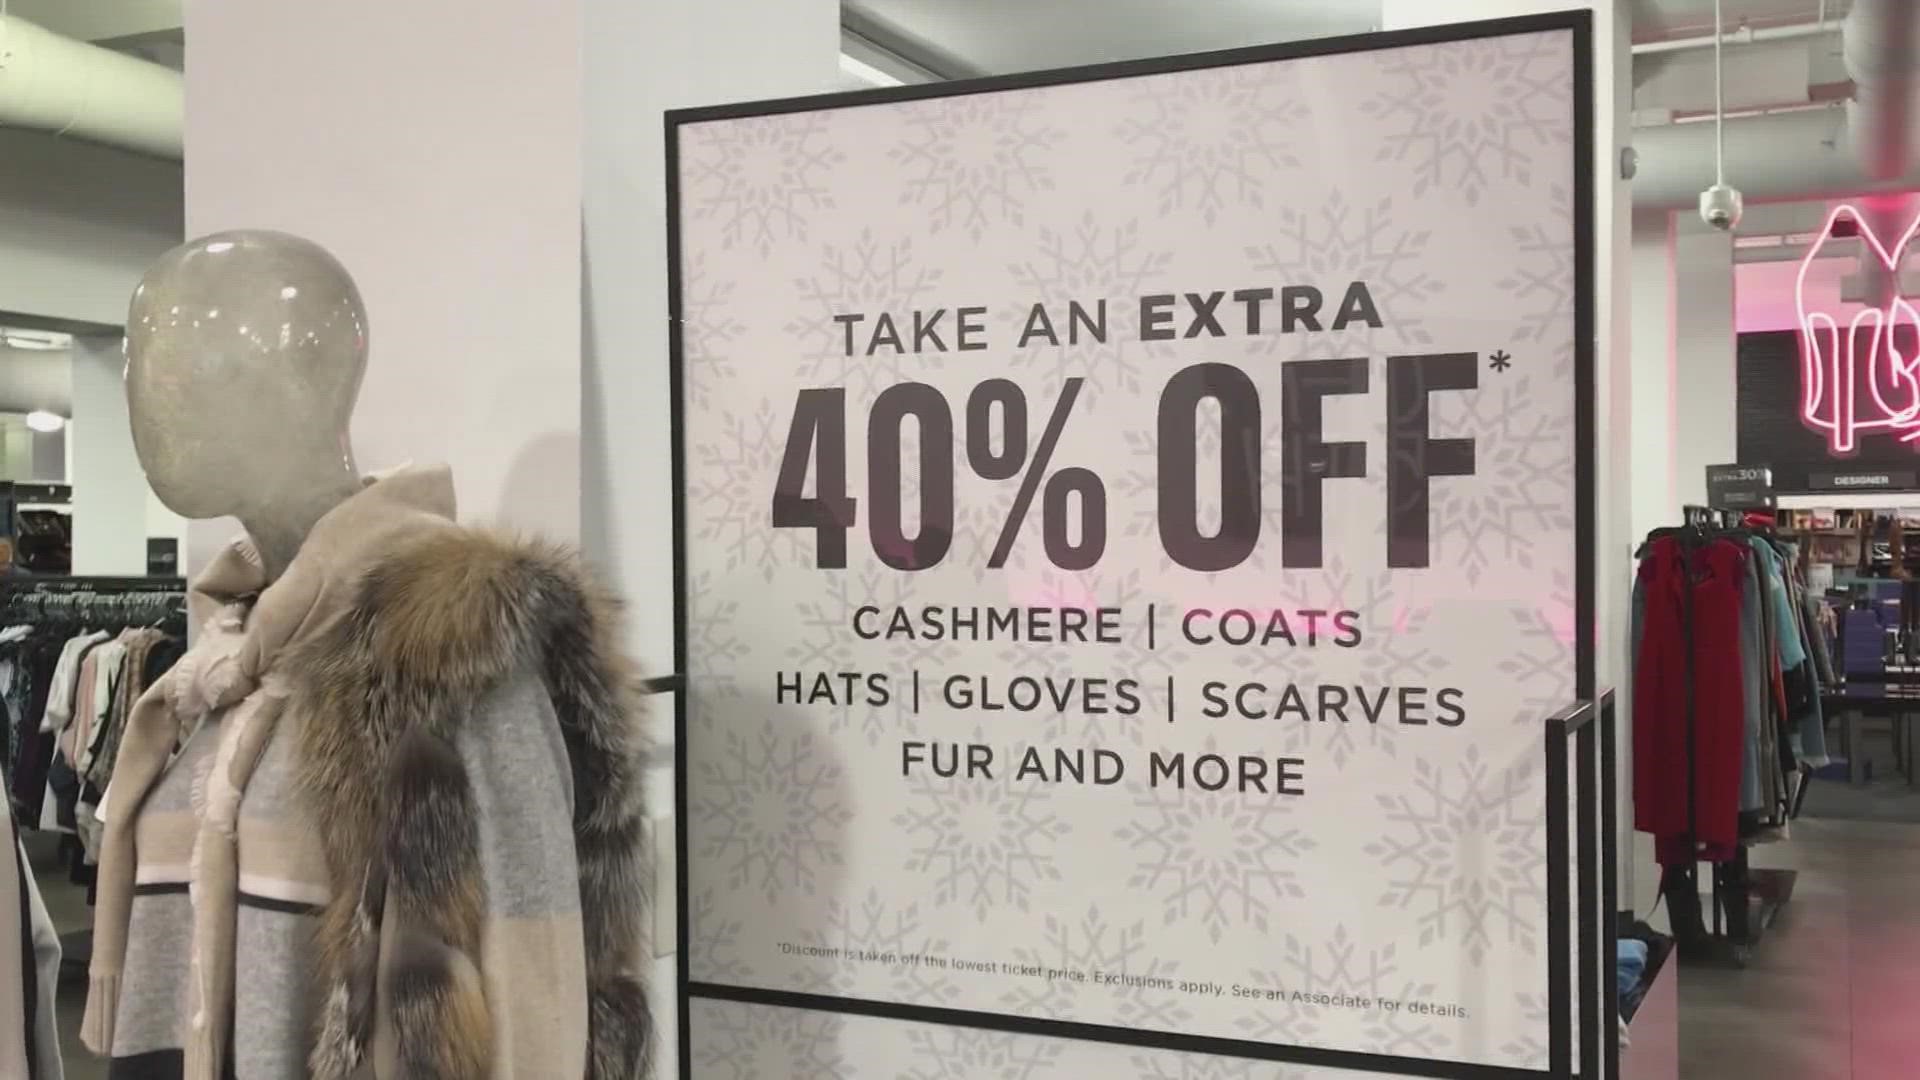 You might want to check out these deals while shopping for the holidays. Tanya Rivera has more on the best December buys.